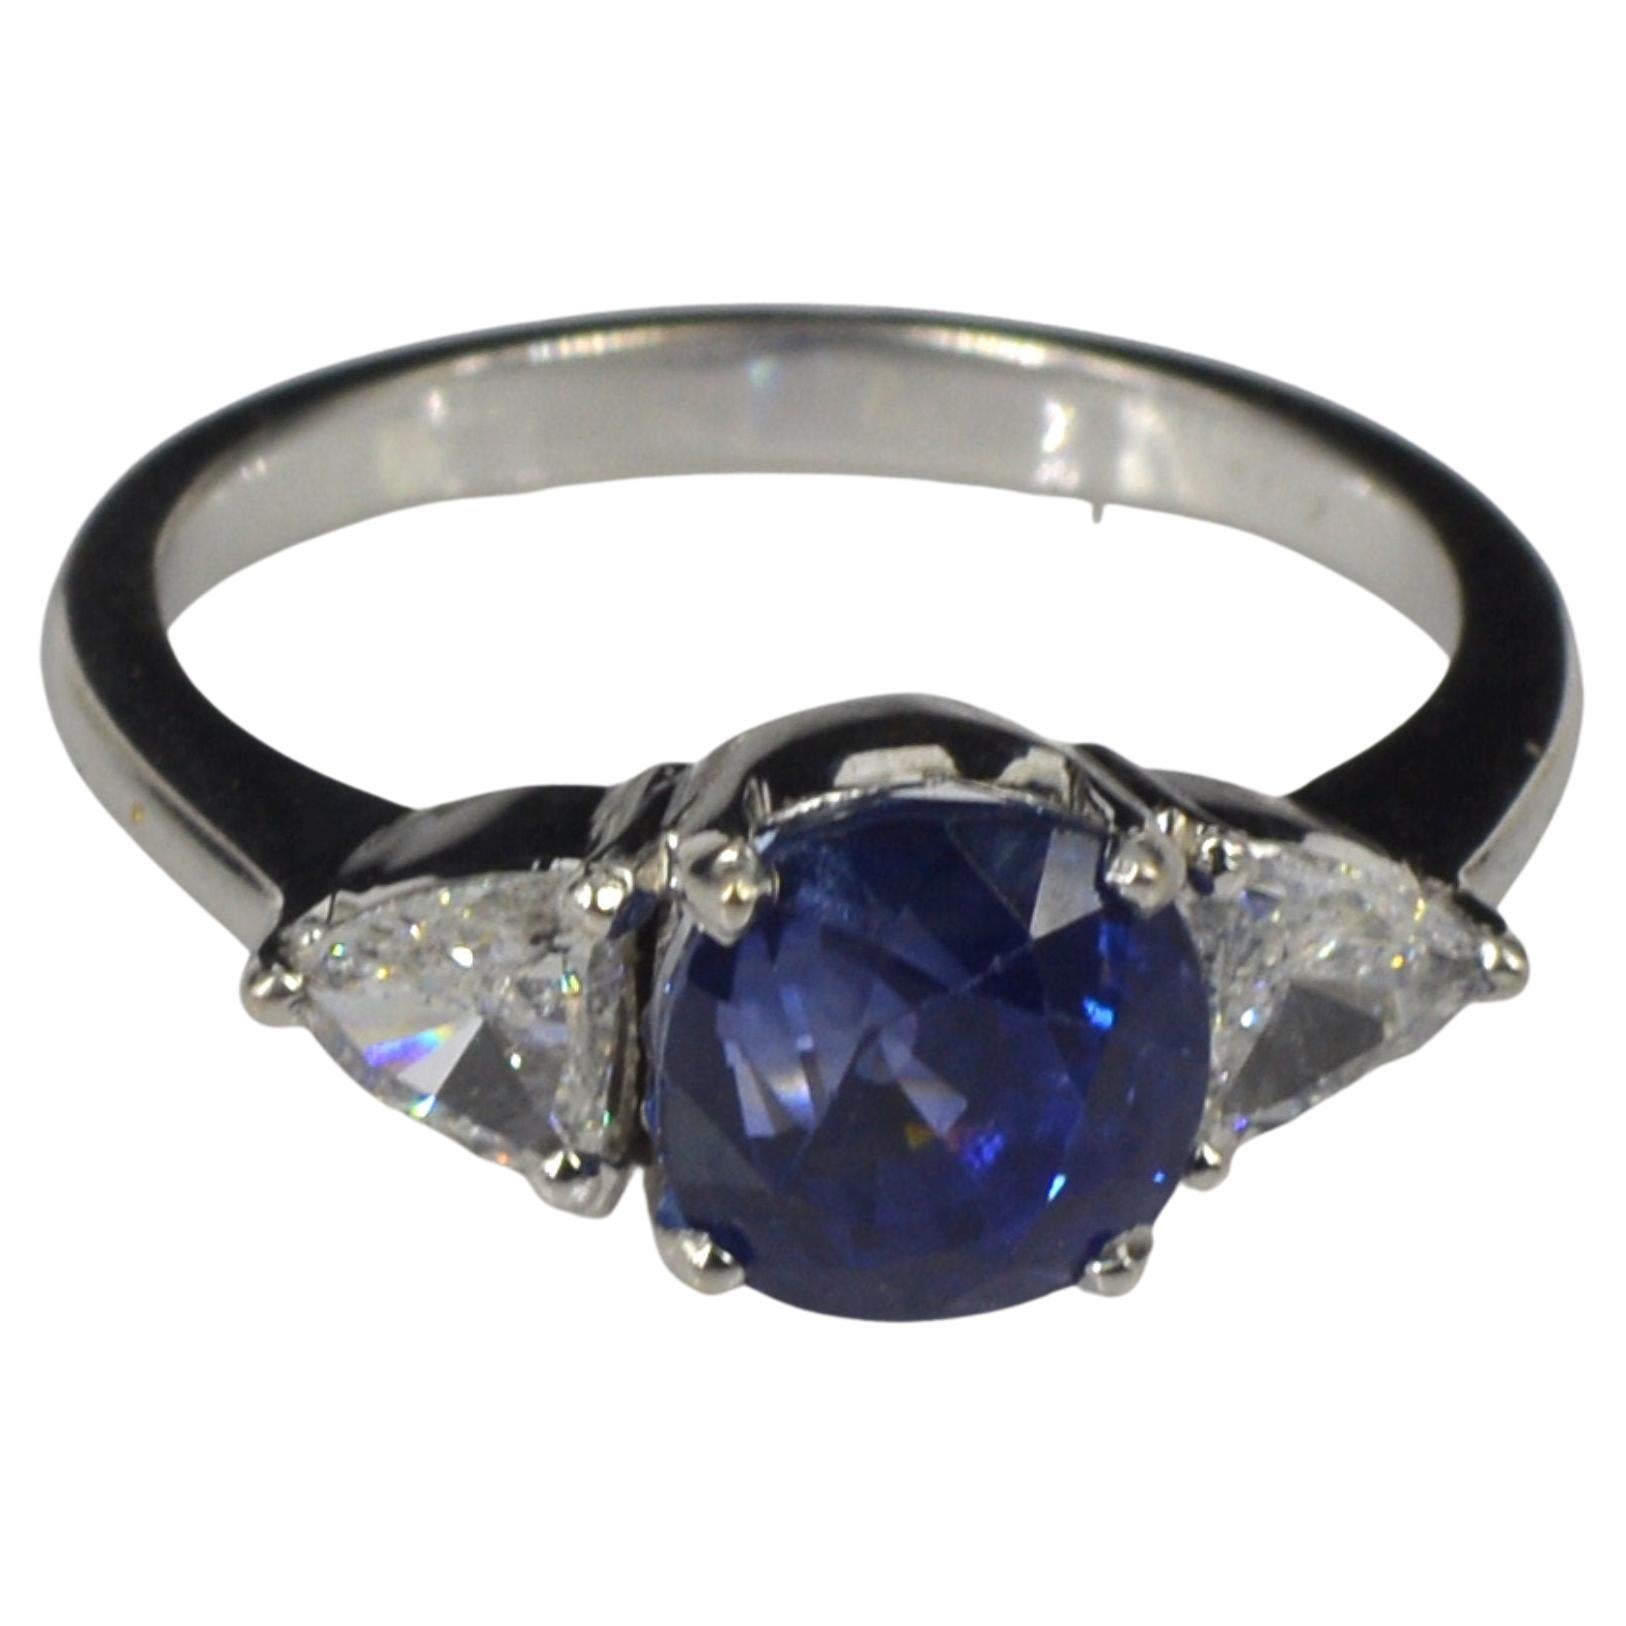 For Sale:  Natural Sapphire Engagement Ring, Vintage Sapphire Wedding Ring